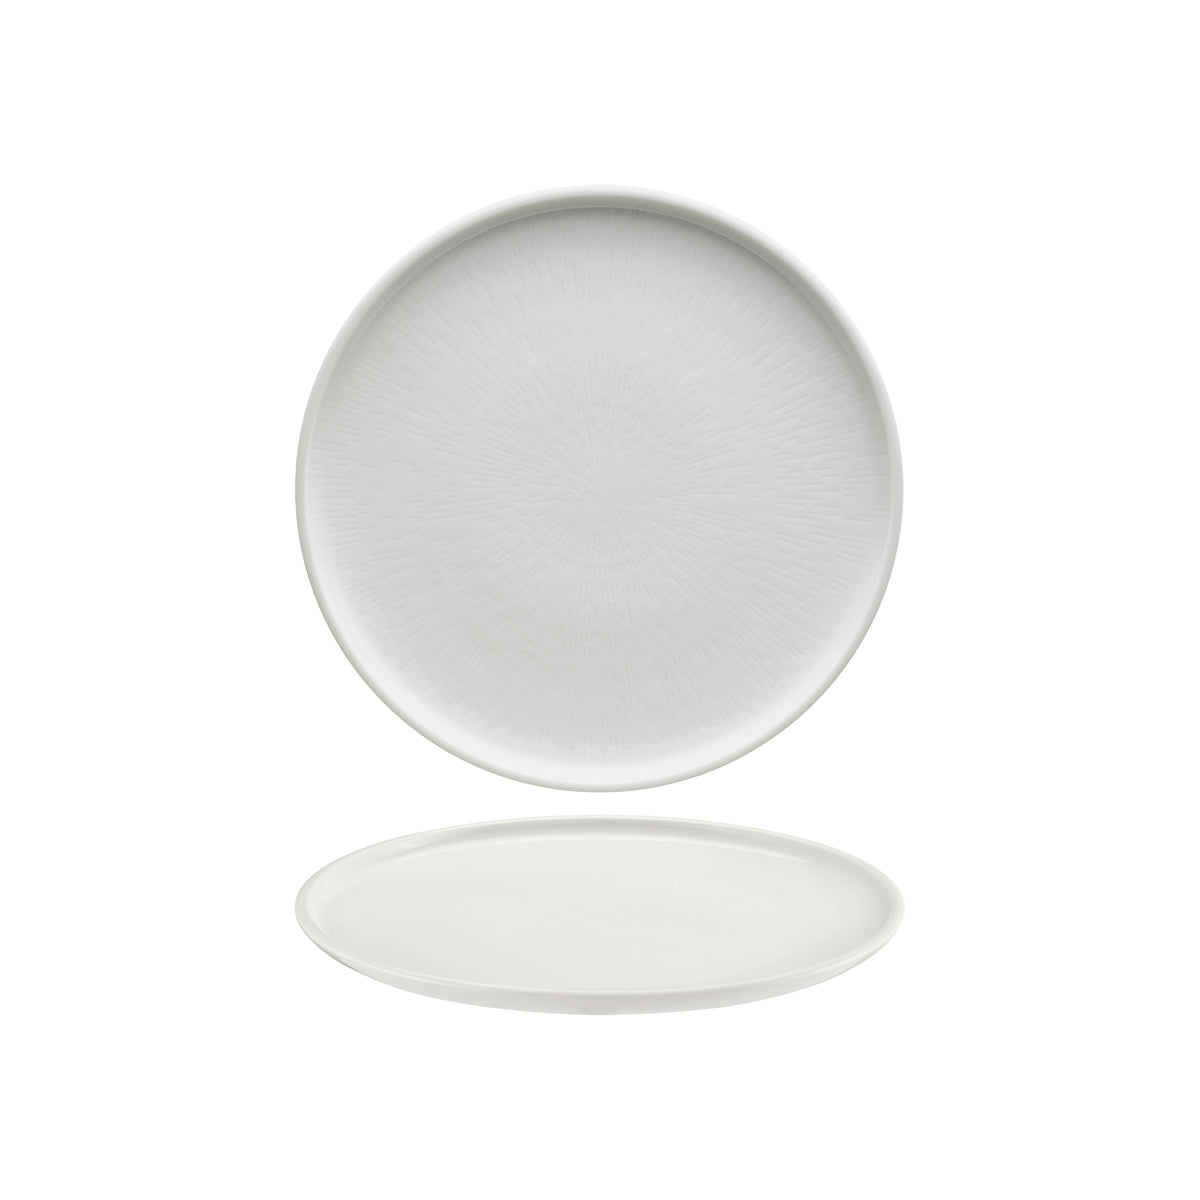 SH9251274 Schonwald Shiro Round Flat Coupe Plate Relief Design 240mm Tomkin Australia Hospitality Supplies